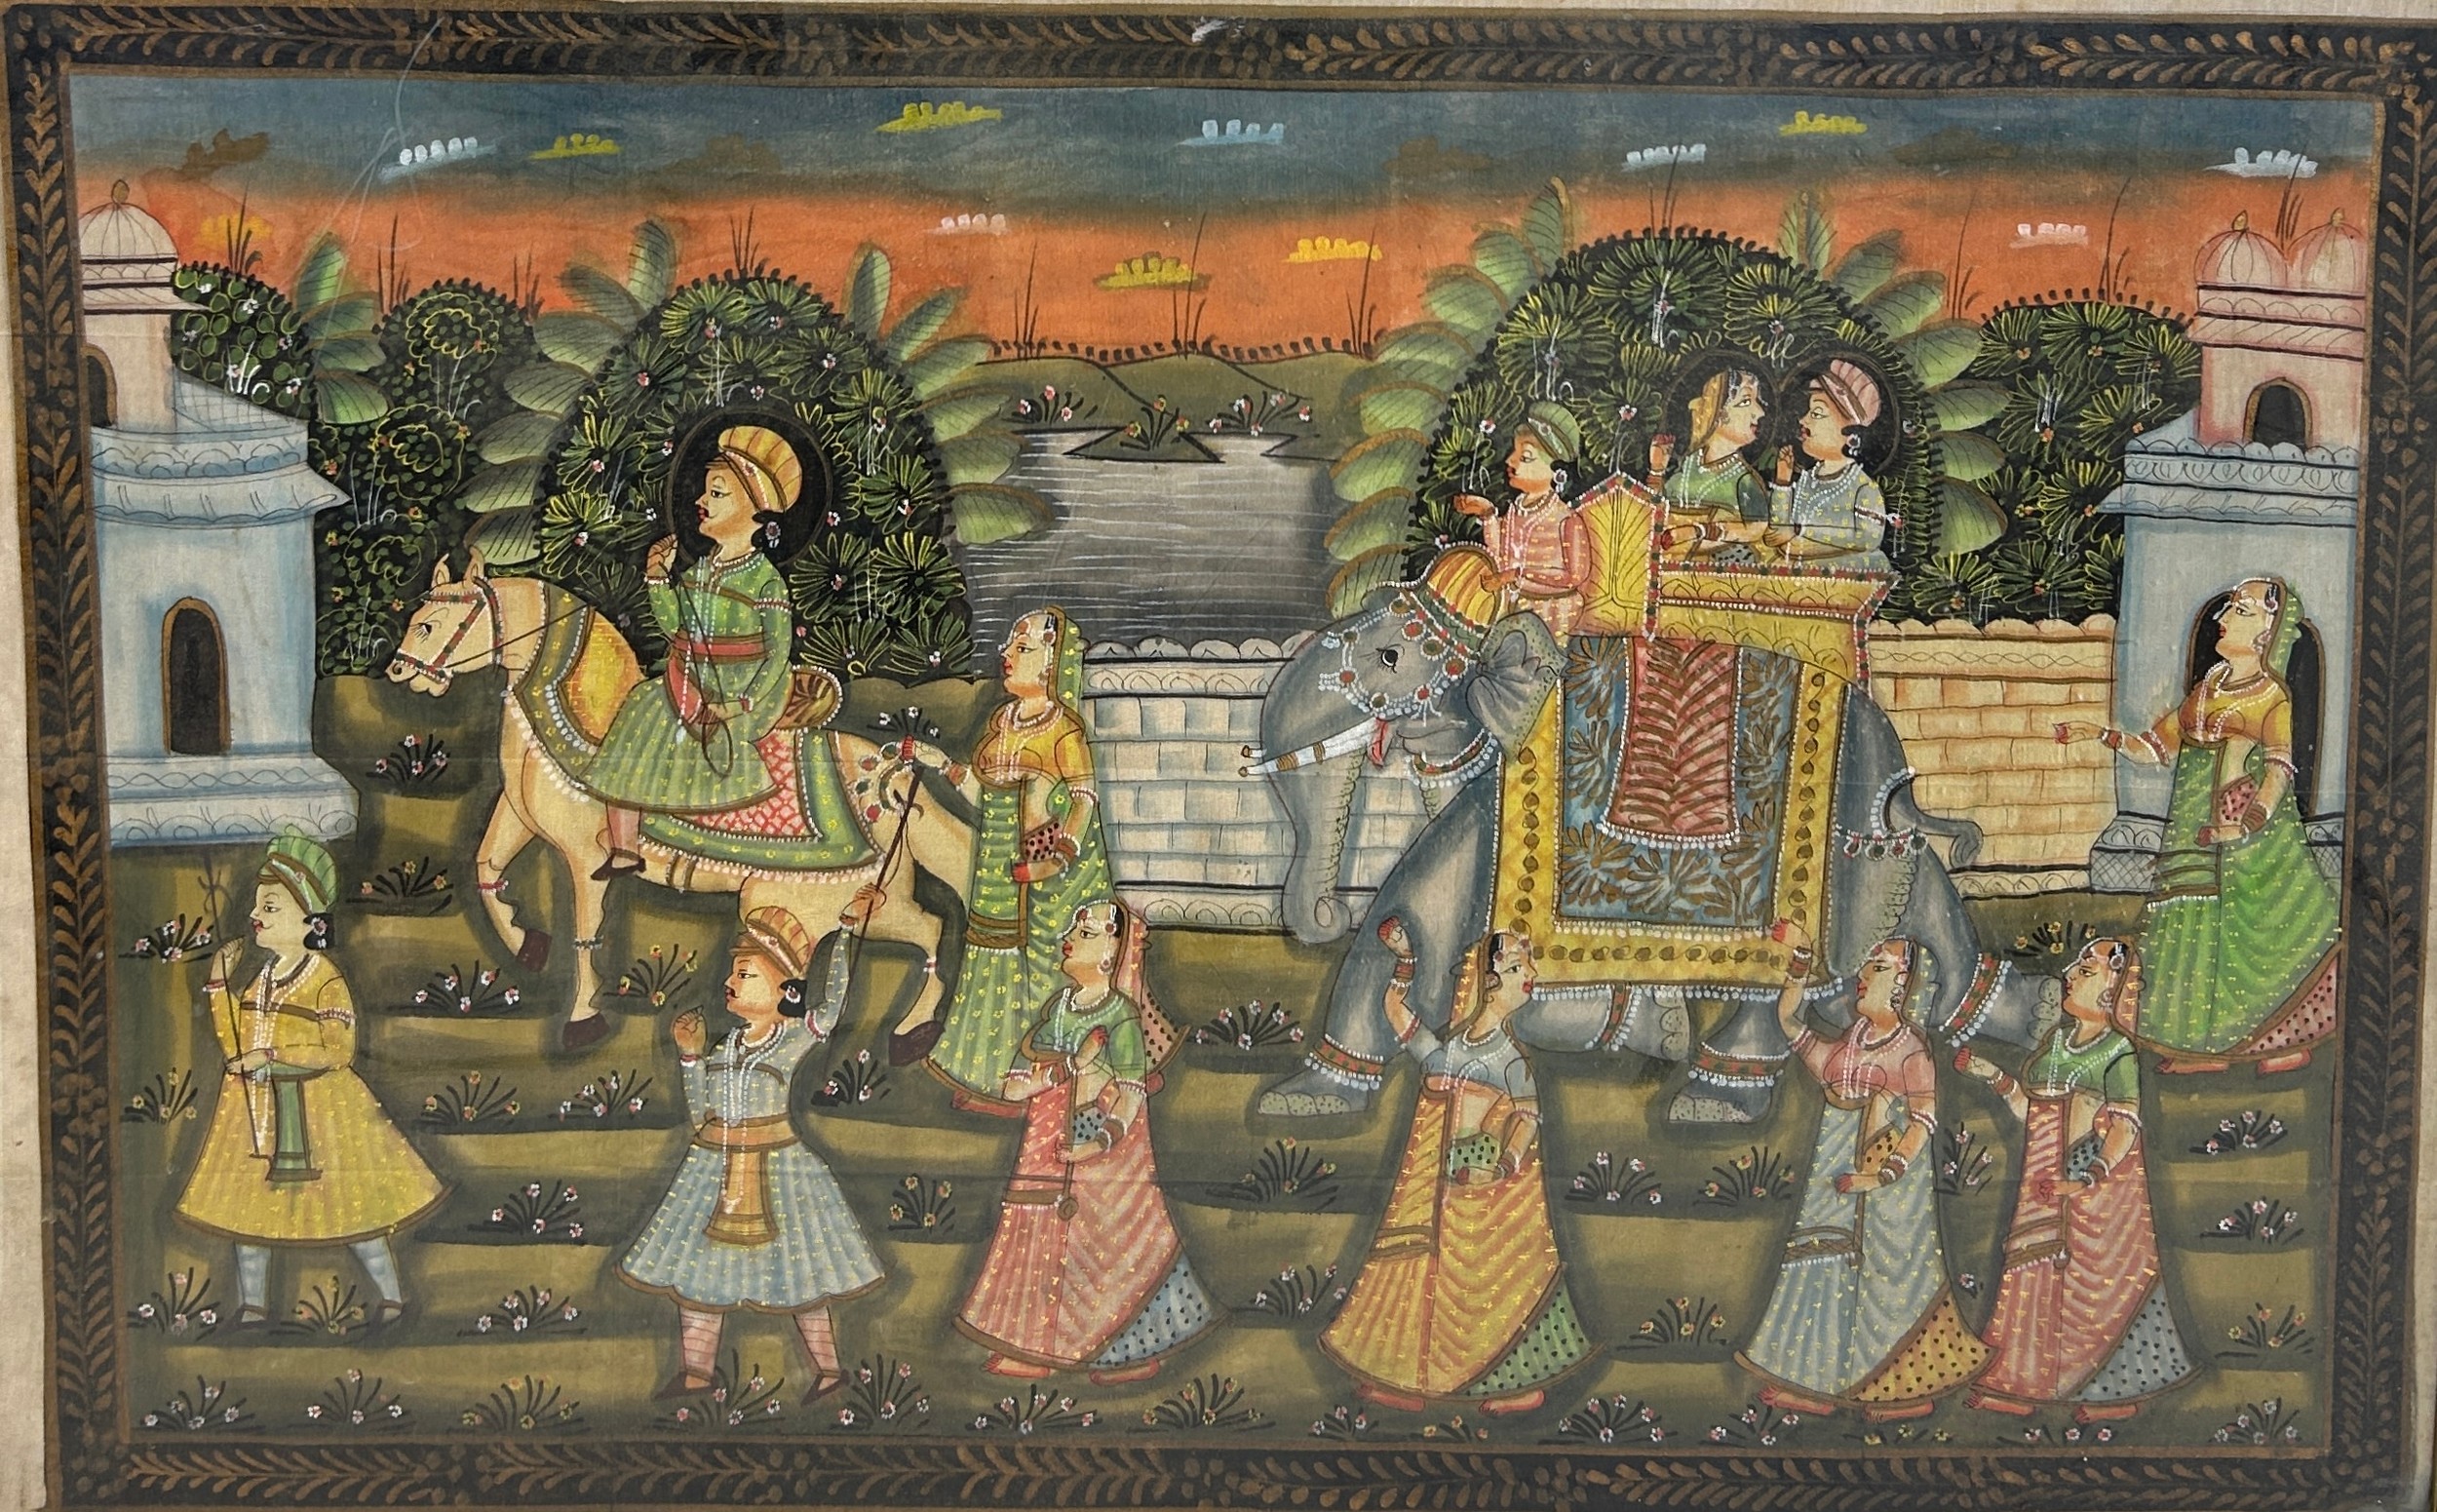 AN INDIAN PAINTING ON LINEN, Mounted in a frame and glazed. 113cm x 75cm - Image 2 of 5